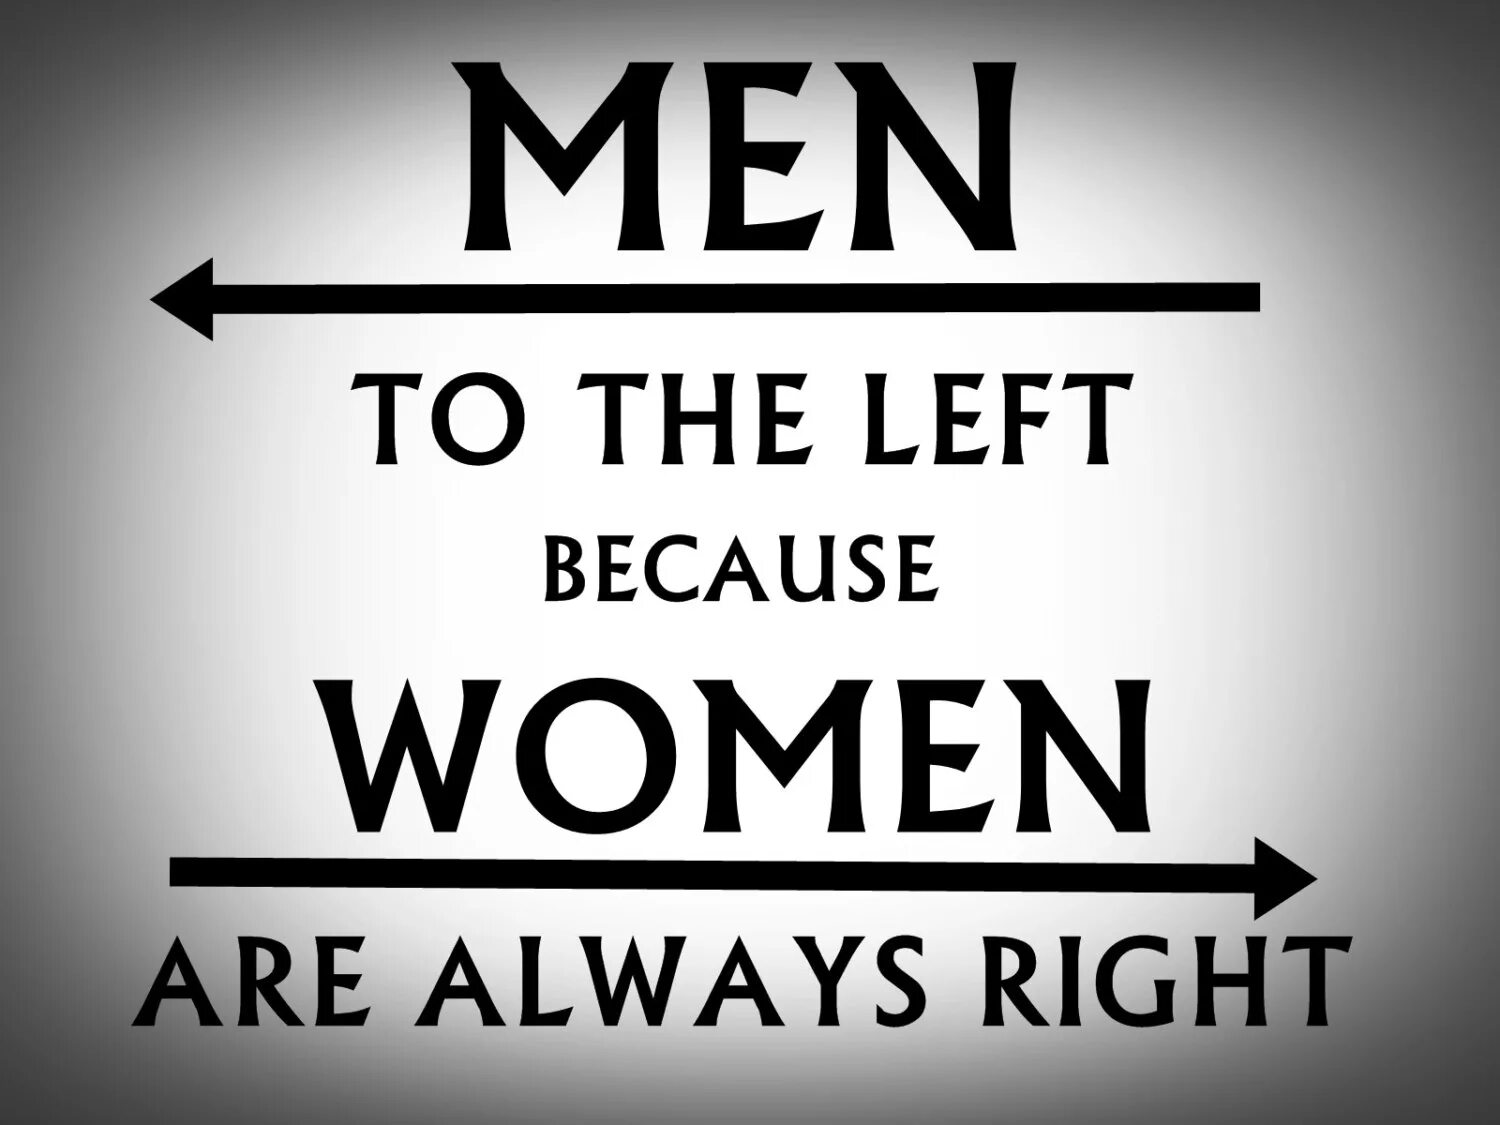 Always be a woman. Men to the left because women are always right. Women always right.. Women are always right. Women ARS always right.